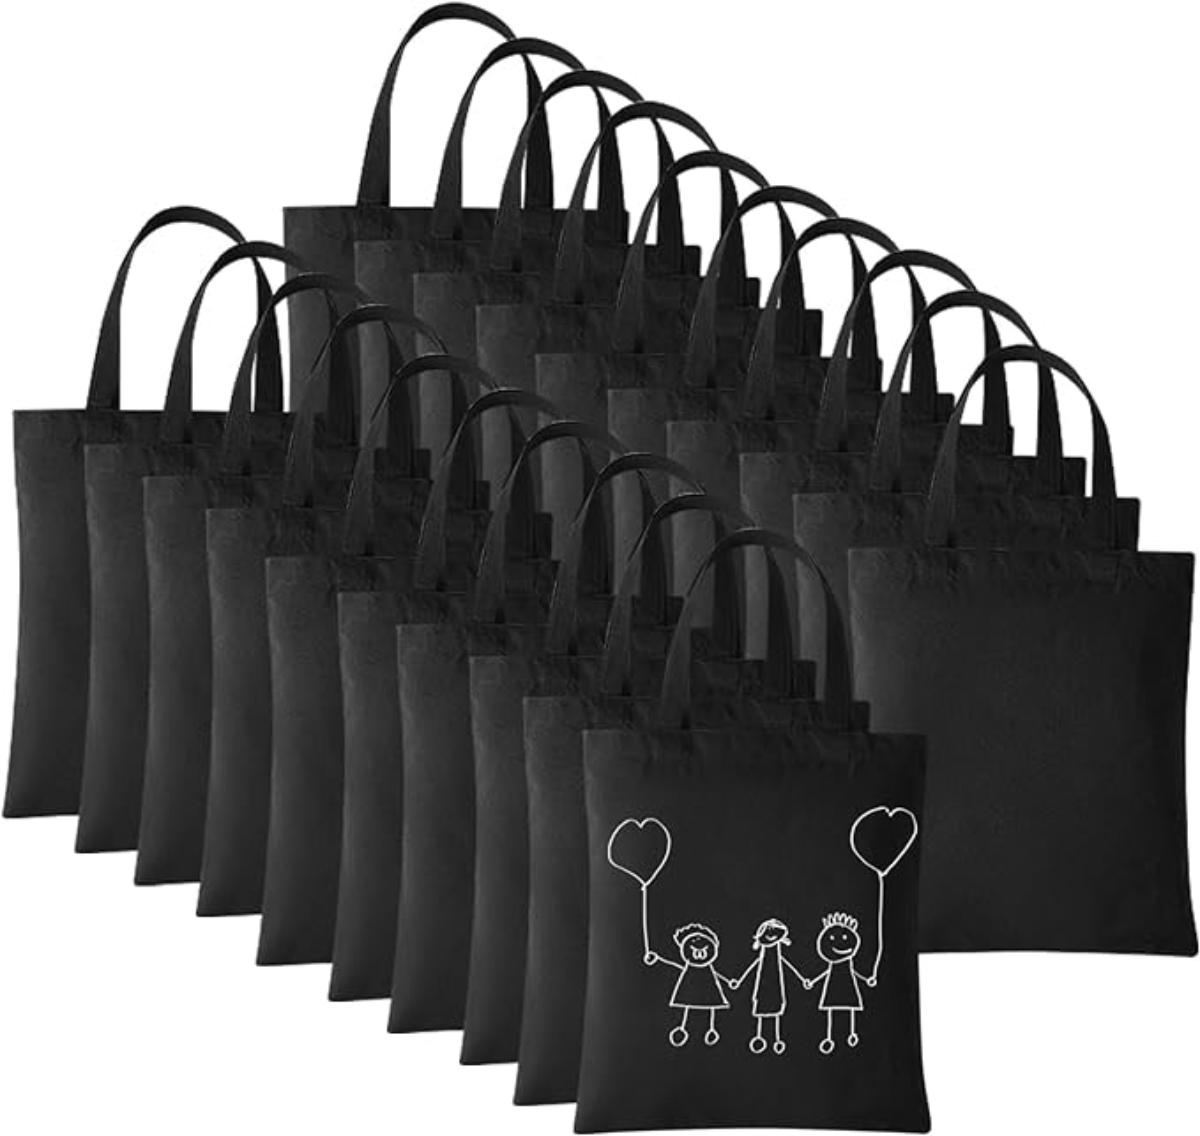 Youke Ola 20 Pieces Canvas Tote Bags